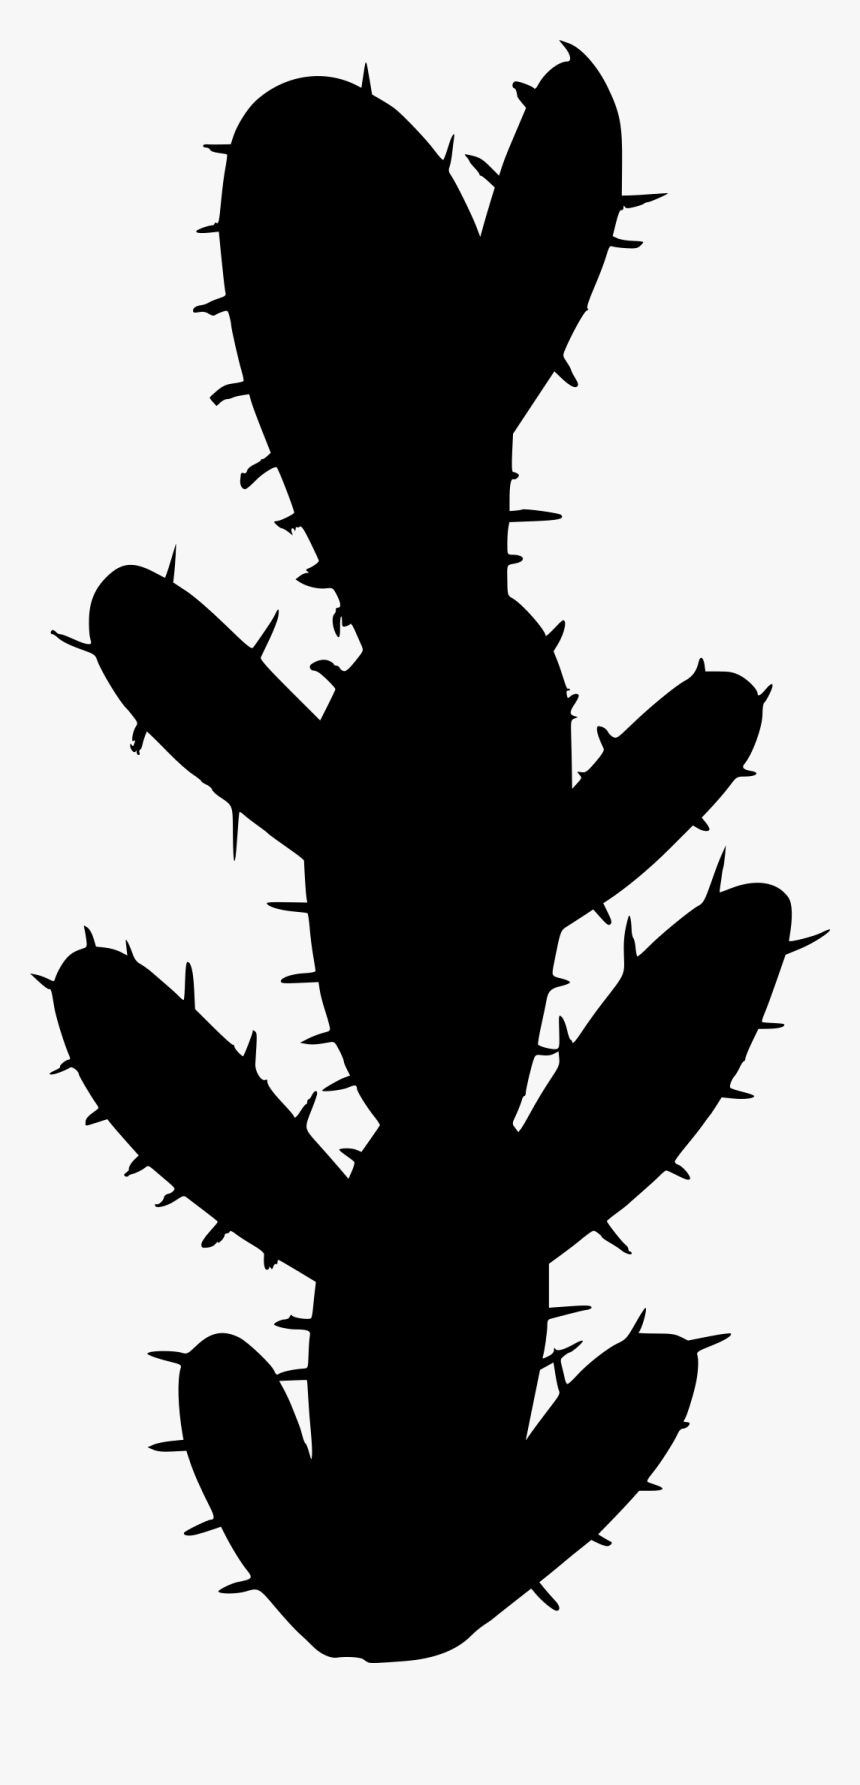 Transparent Cactus Silhouette Vector, HD Png Download, Free Download